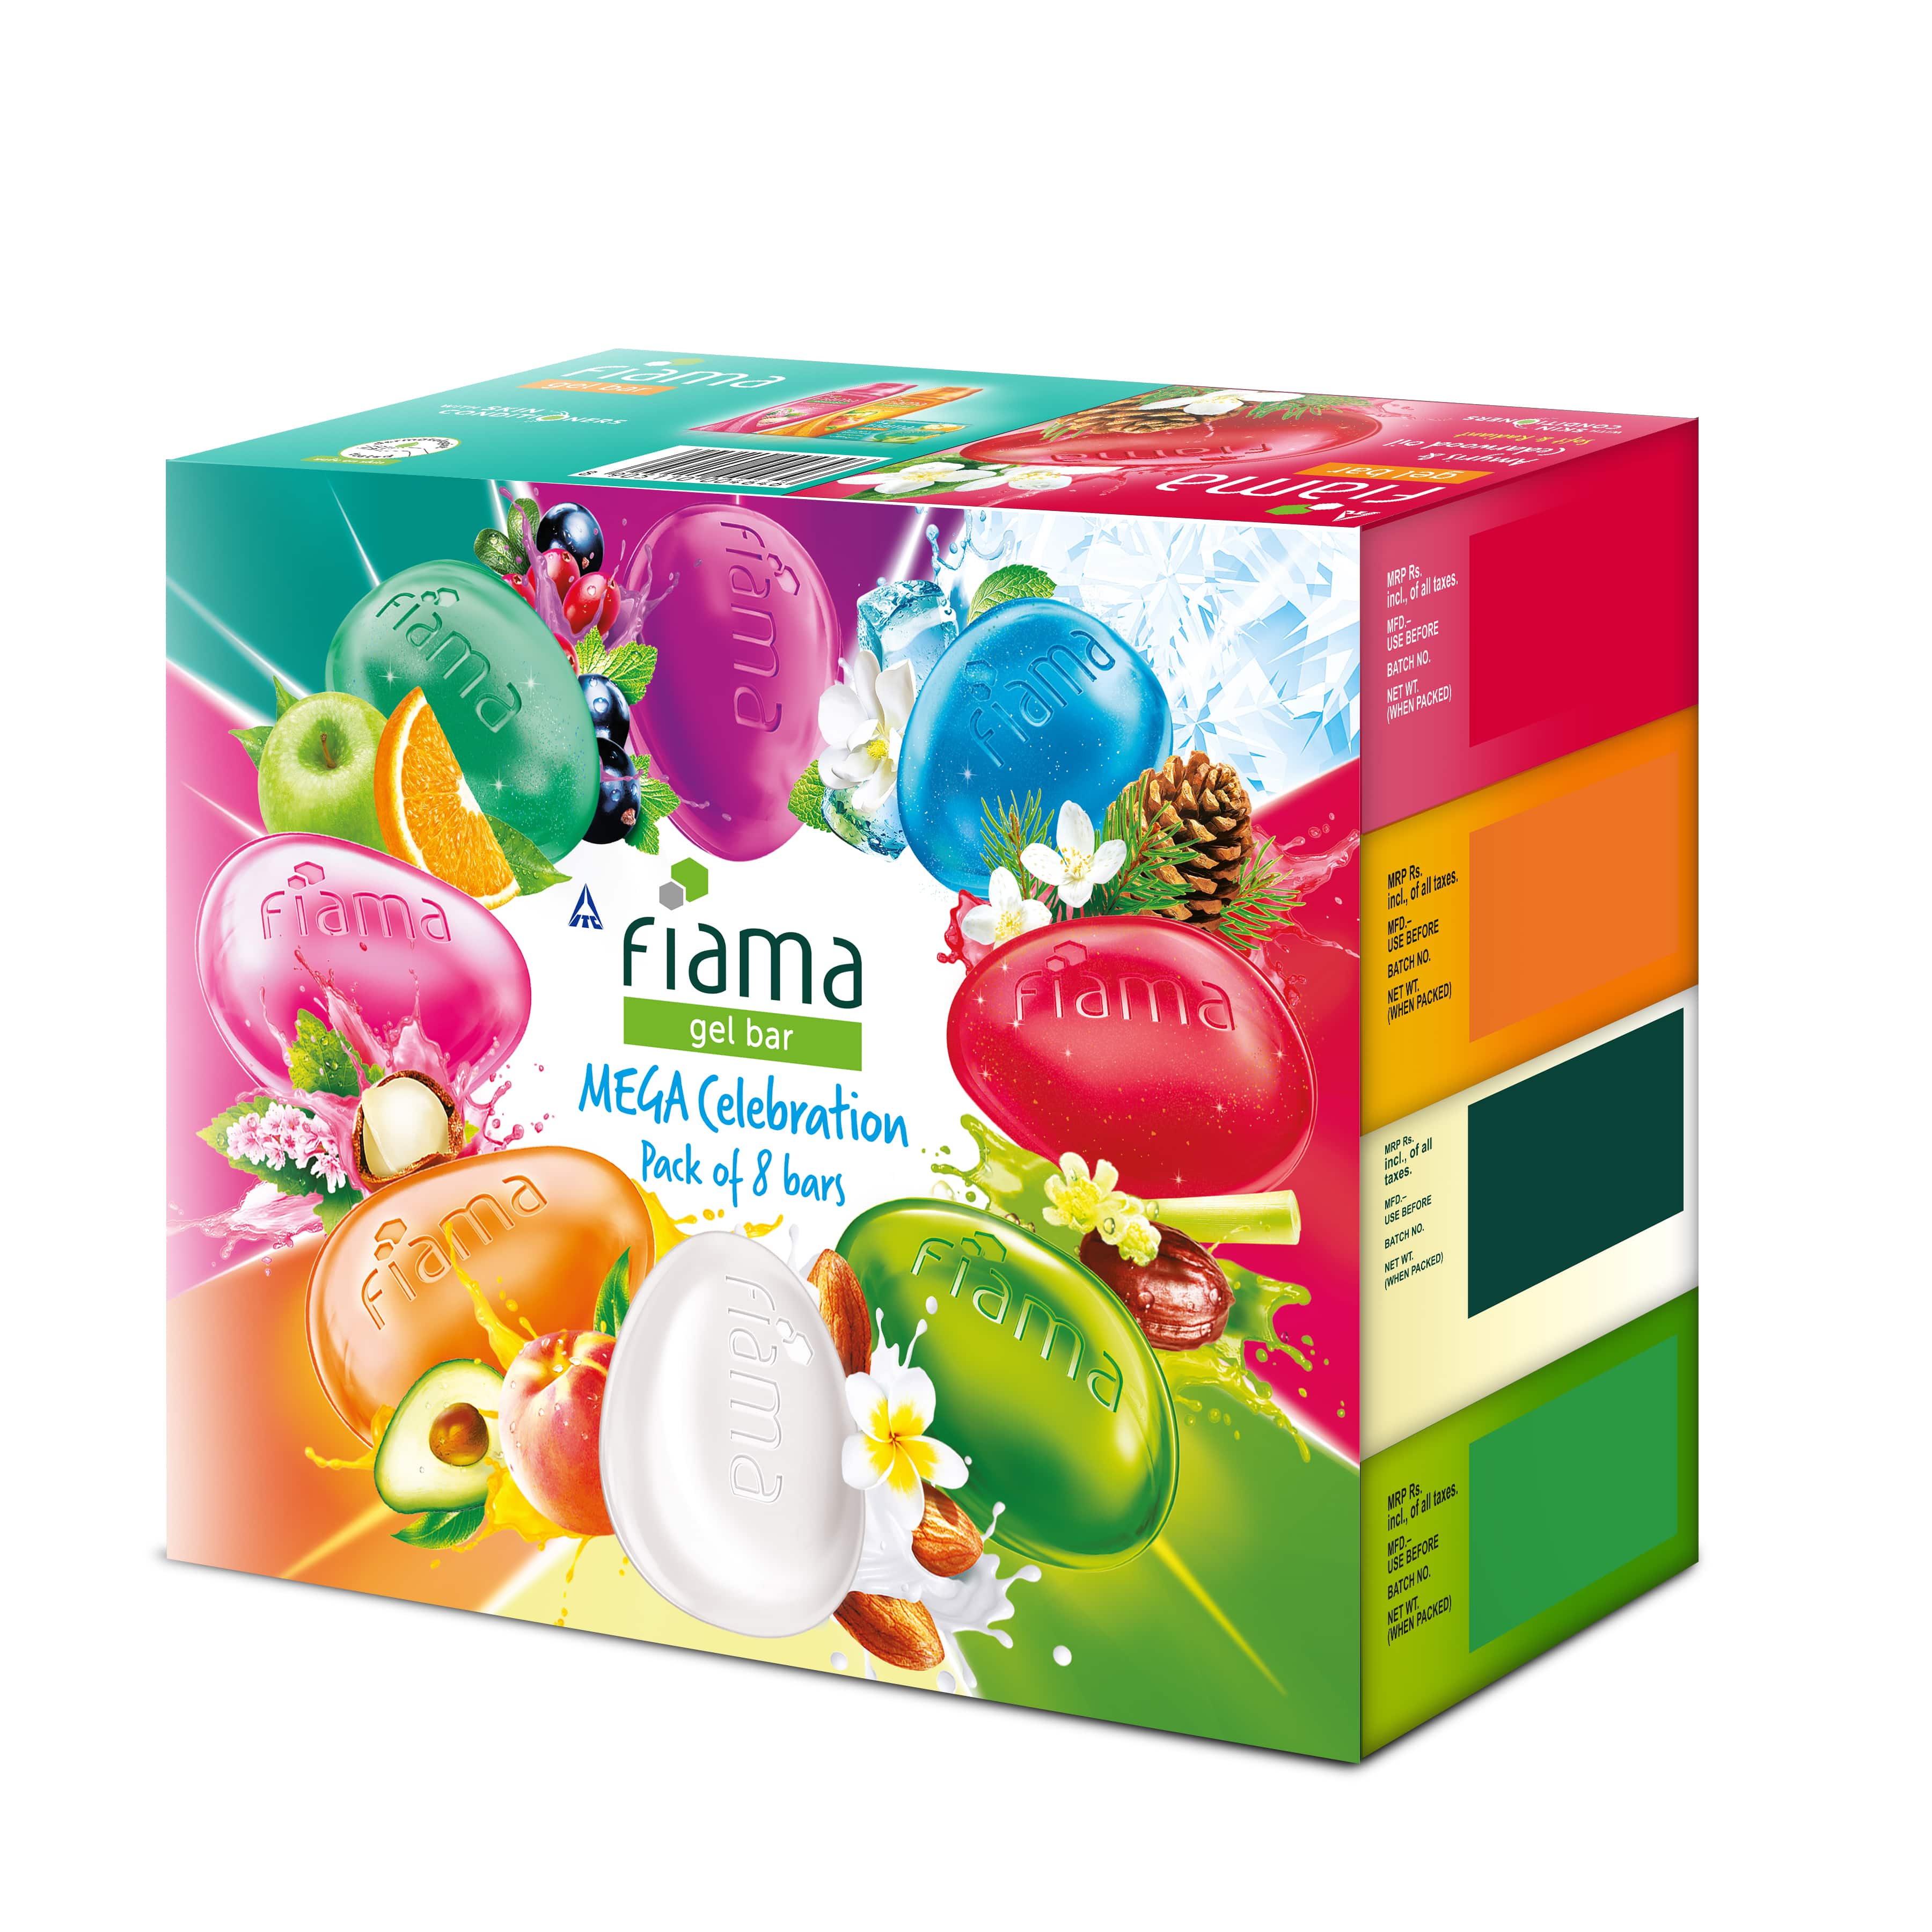 ITC’s Fiama introduces Mega Celebration Pack - A Perfect gift this New Year